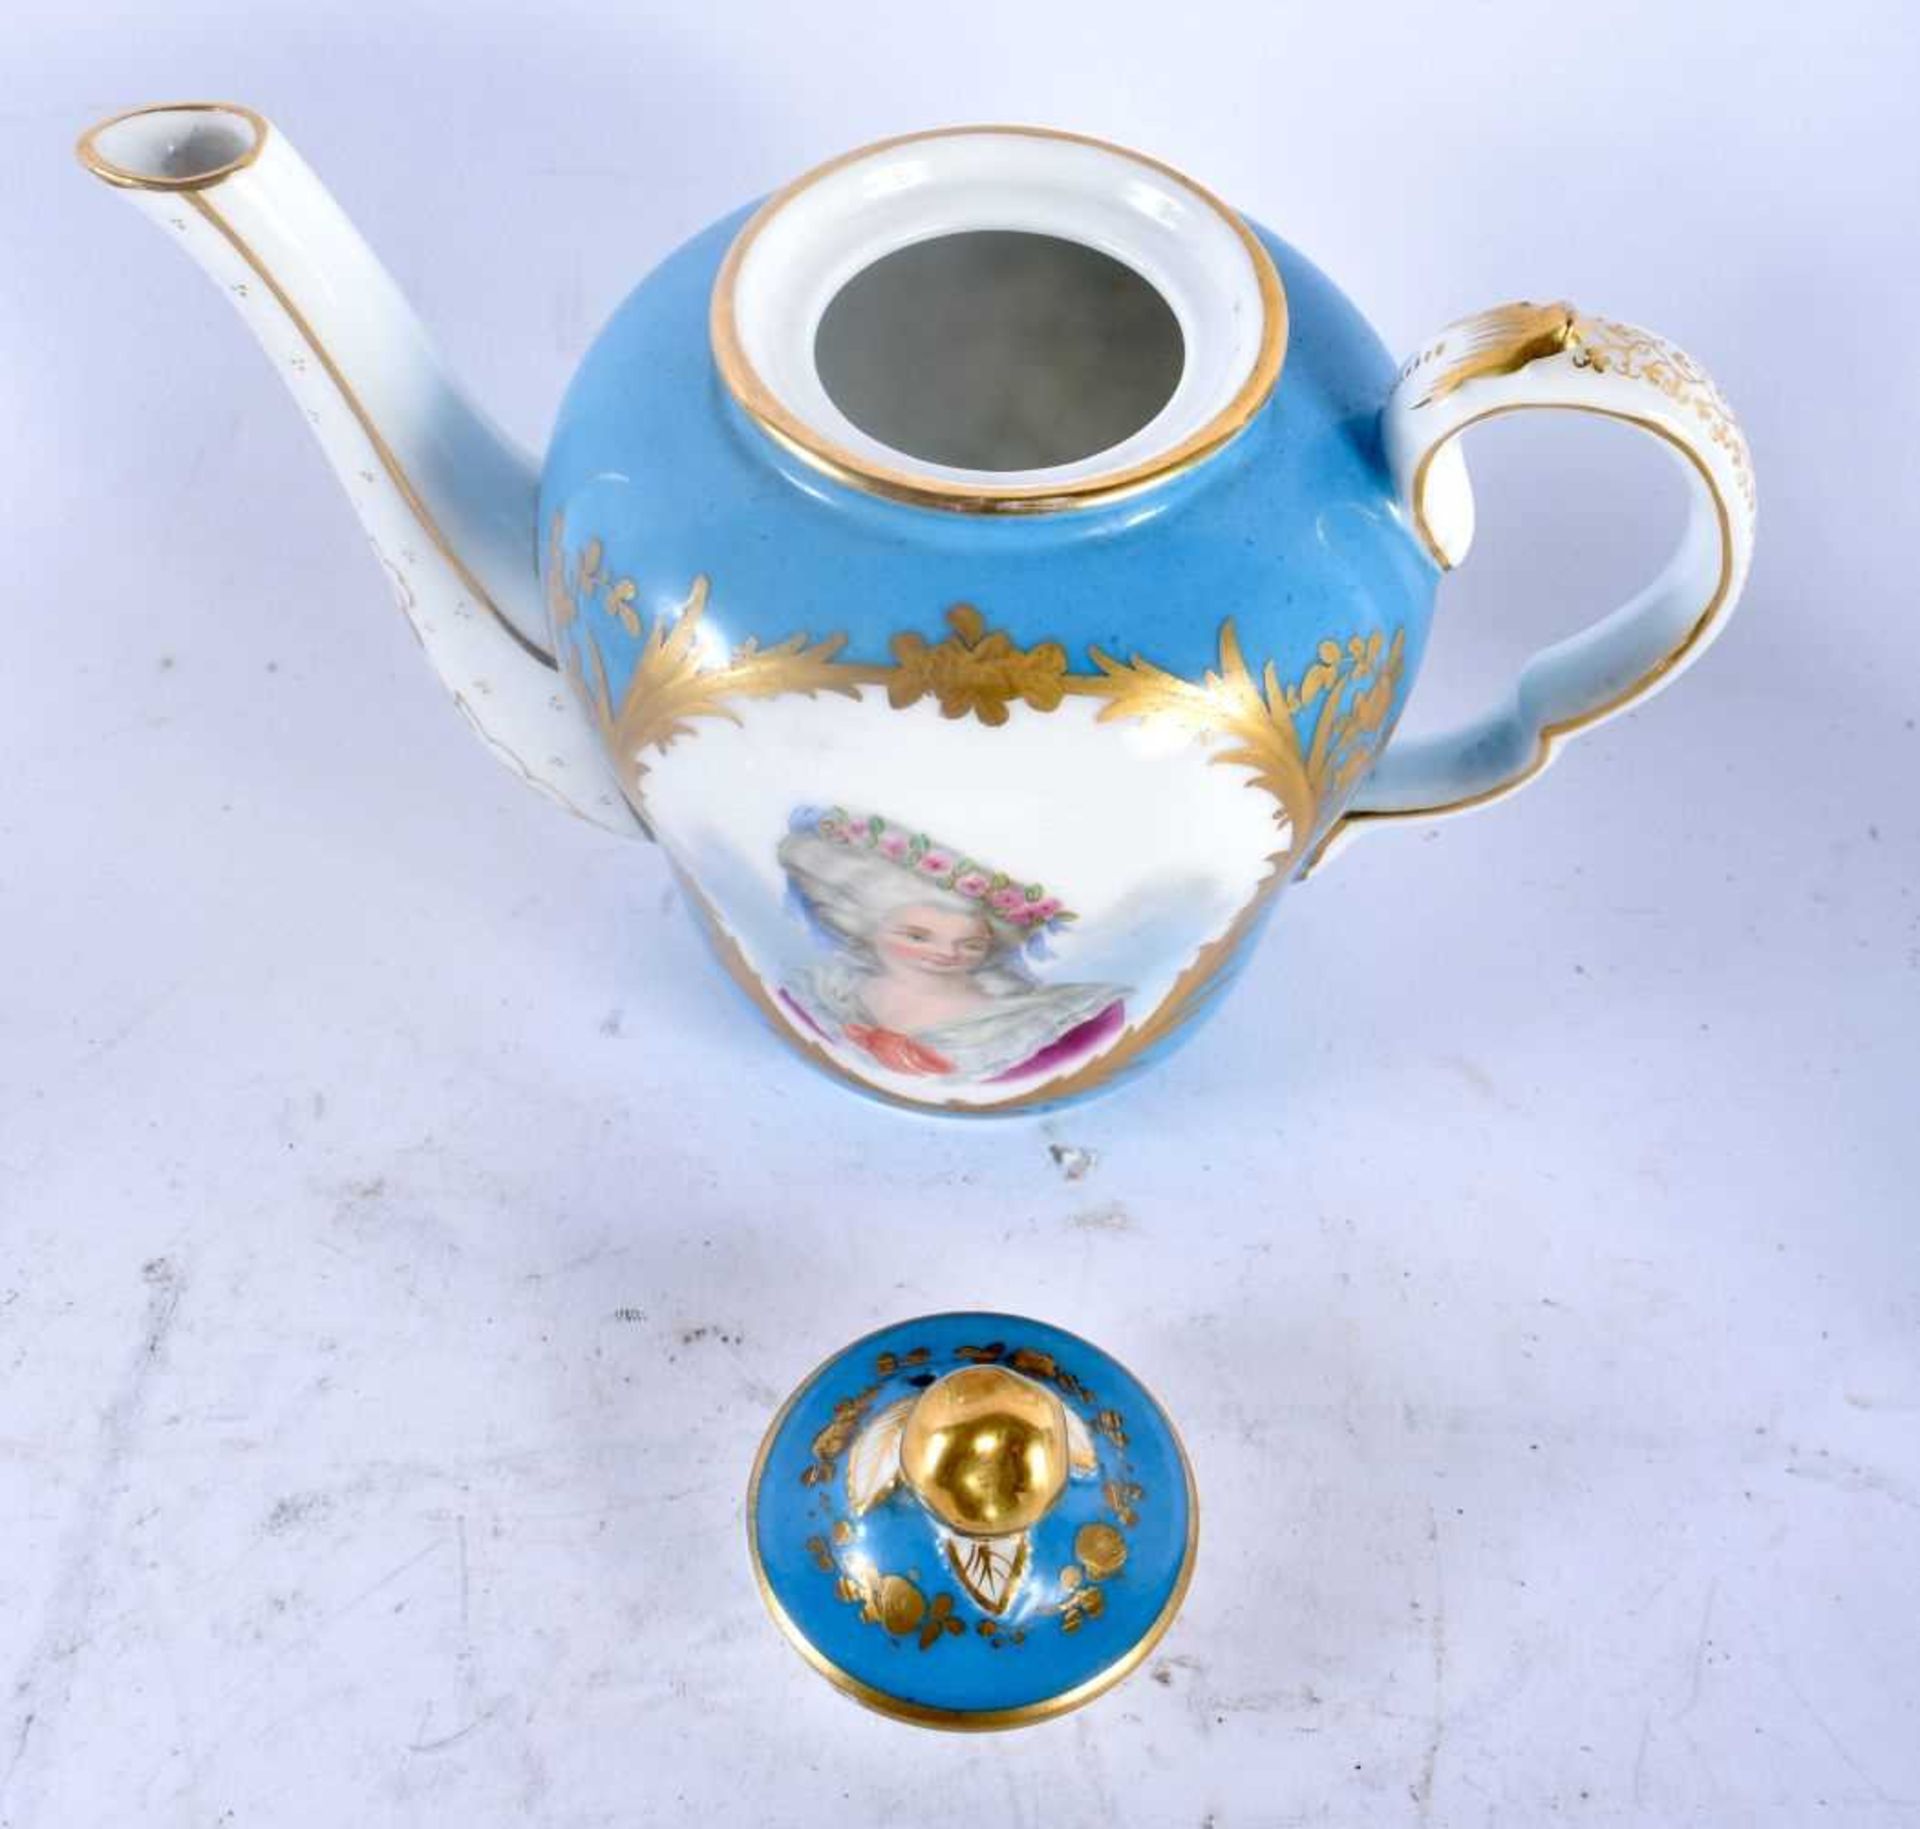 A 19TH CENTURY FRENCH SEVRES PORCELAIN TETE A TETE TEASET painted with portraits of females, on a - Image 6 of 6